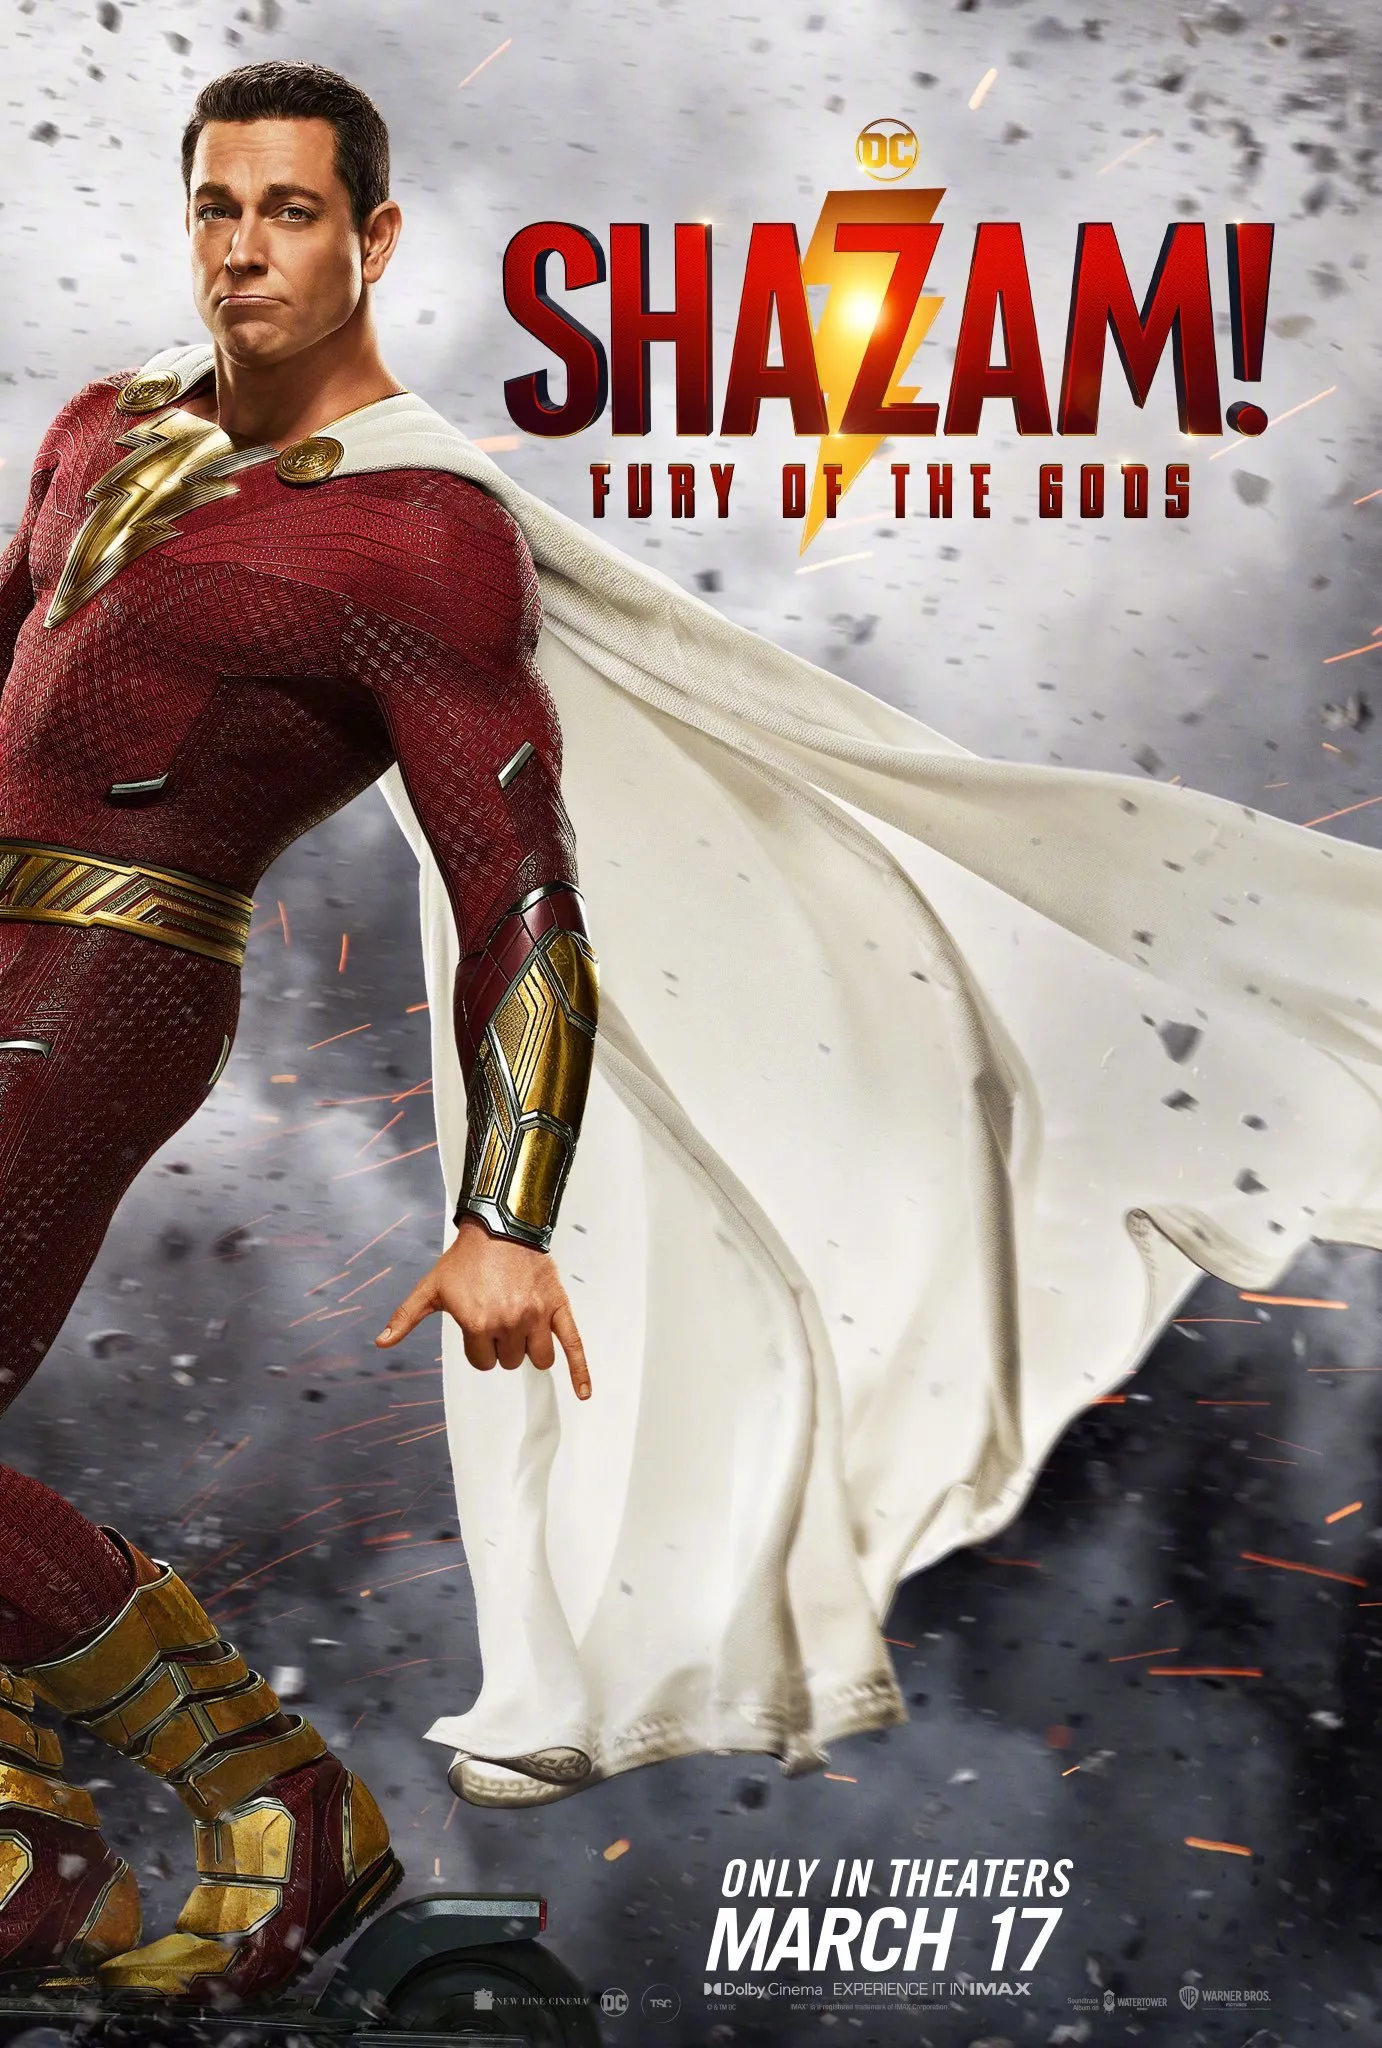 'Shazam! Fury of the Gods' Releases First Poster | FMV6